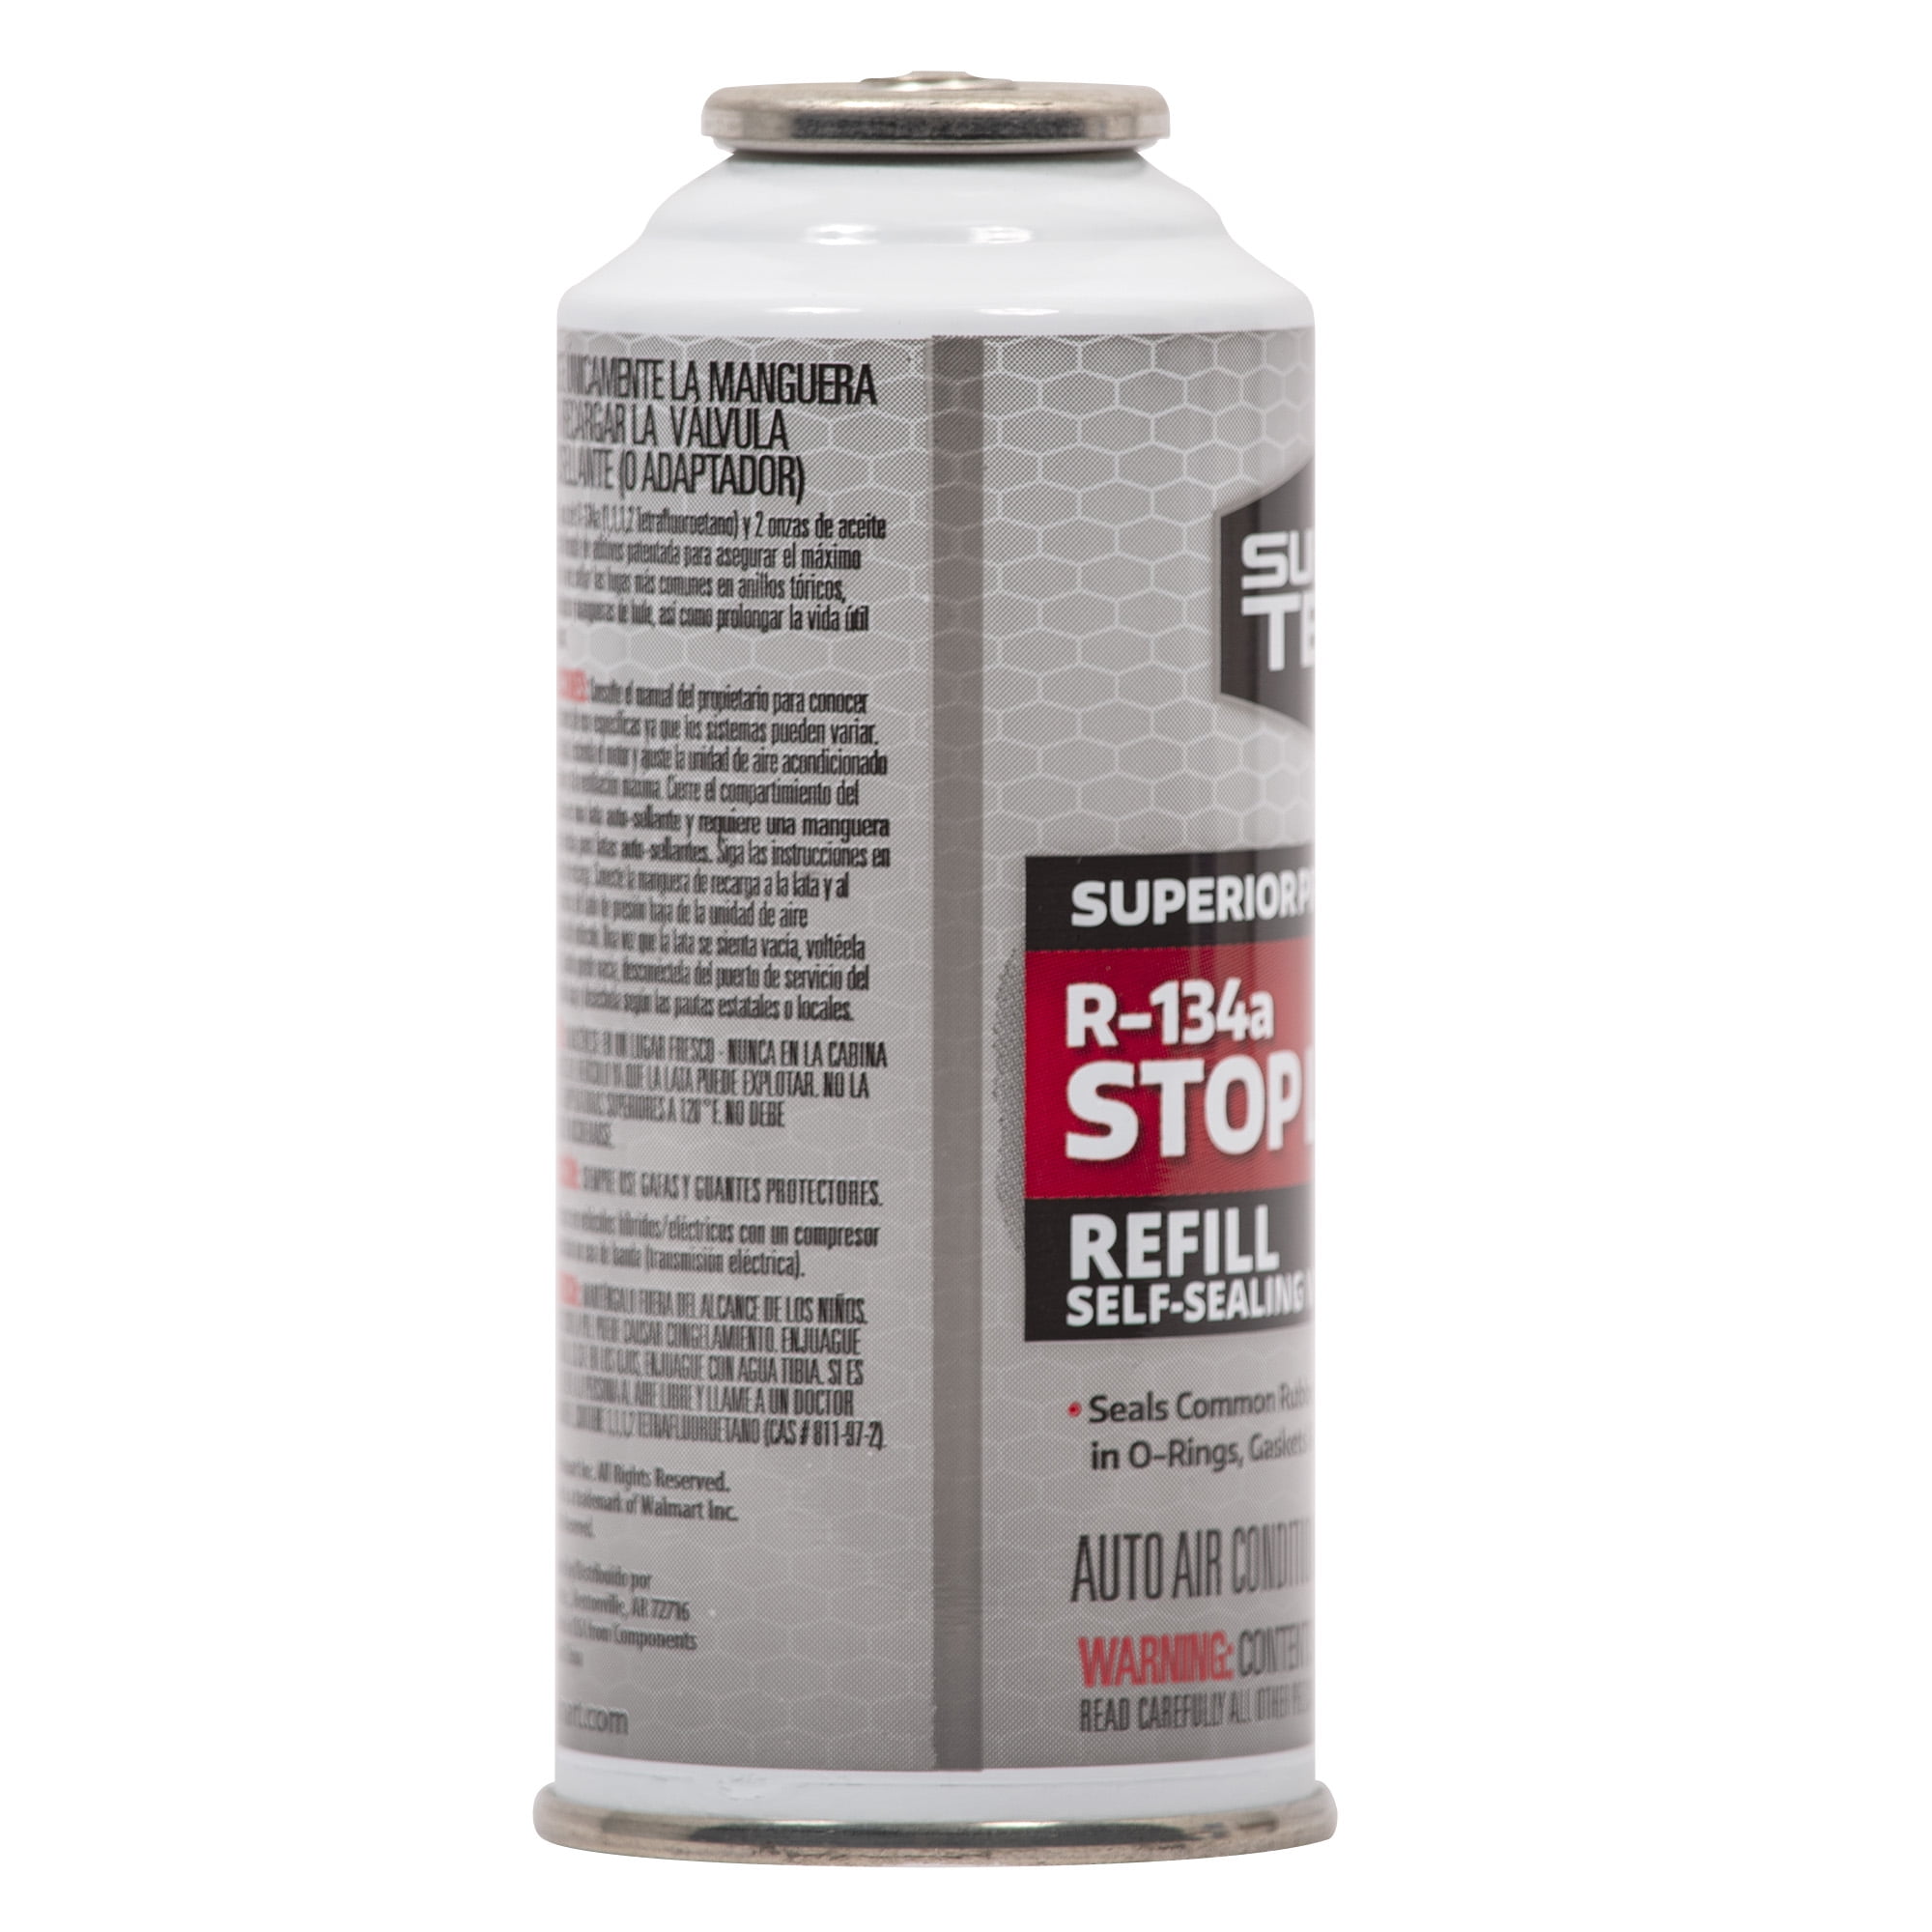 Super Tech Auto R-134a Refrigerant with Stop Leak, Self-sealing, 3 oz.,  Pack of 1 